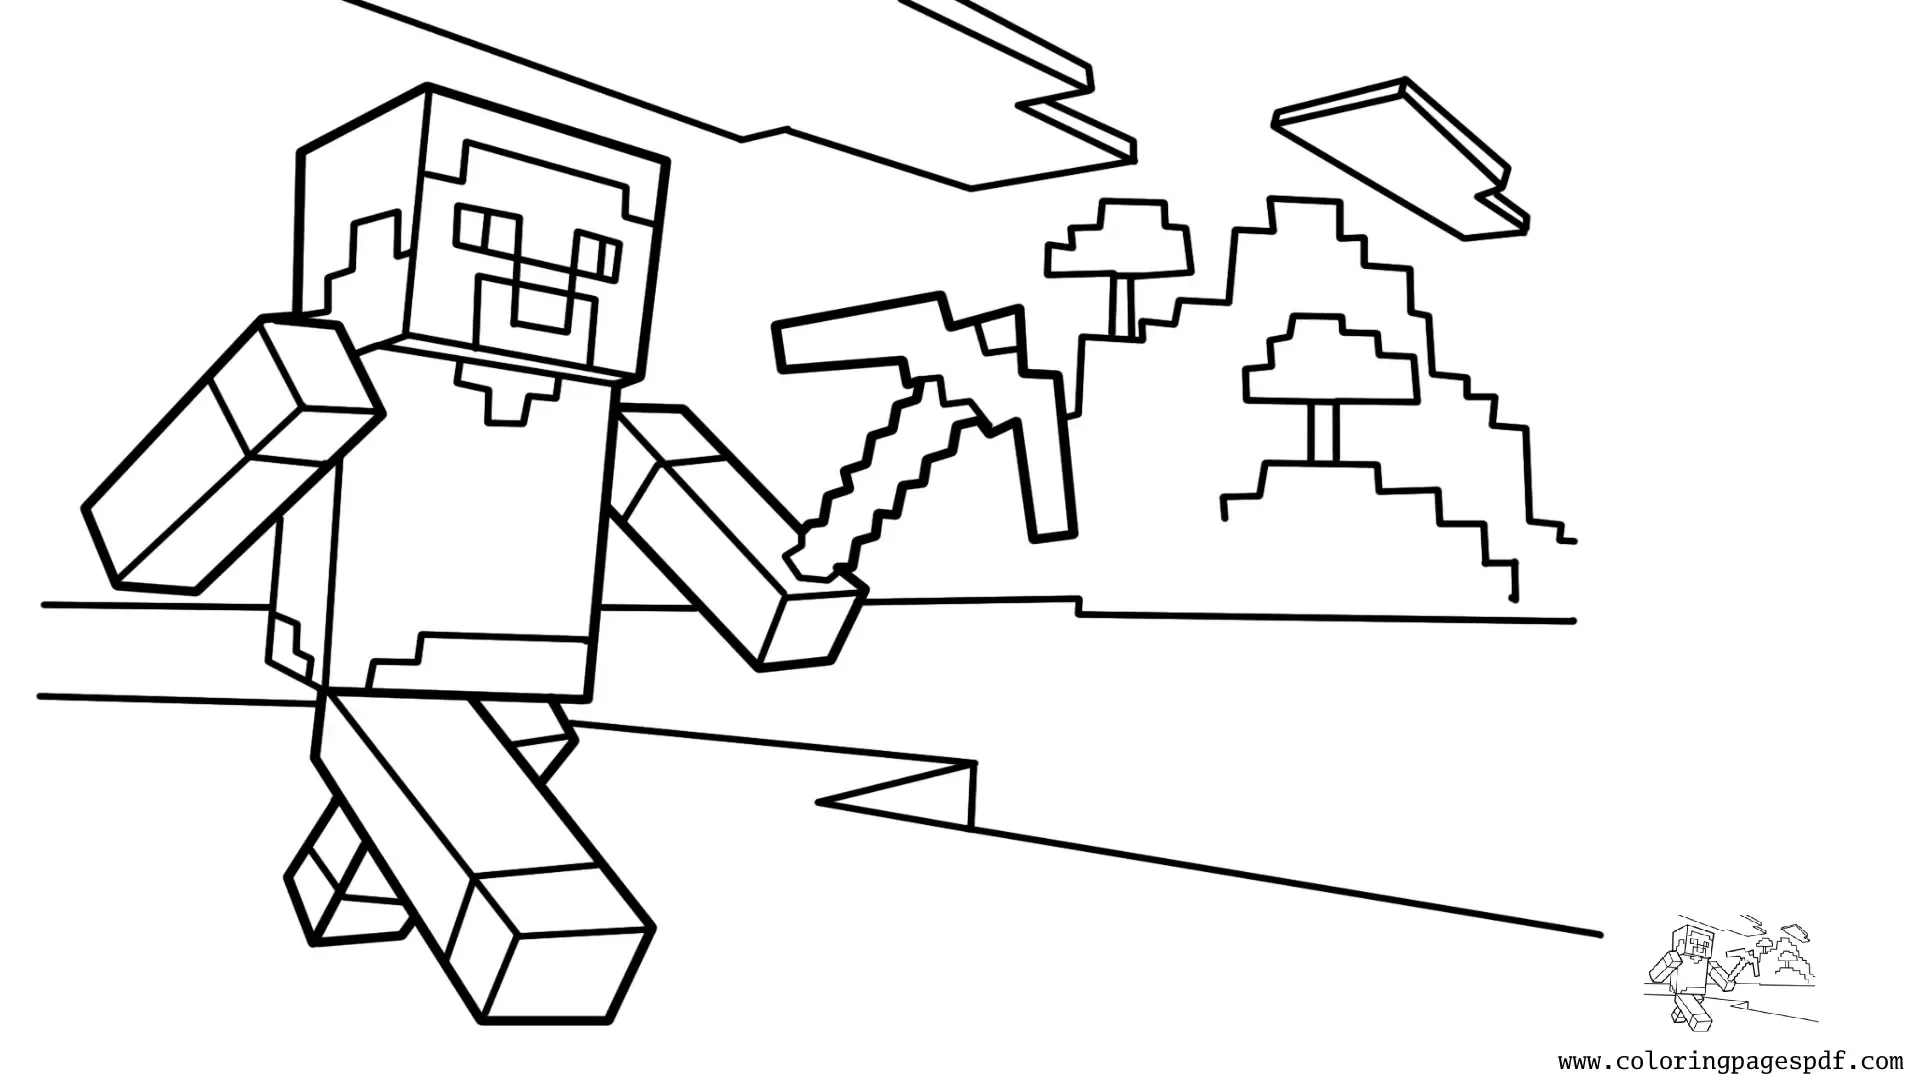 Coloring Page Of Steve With A Pickaxe